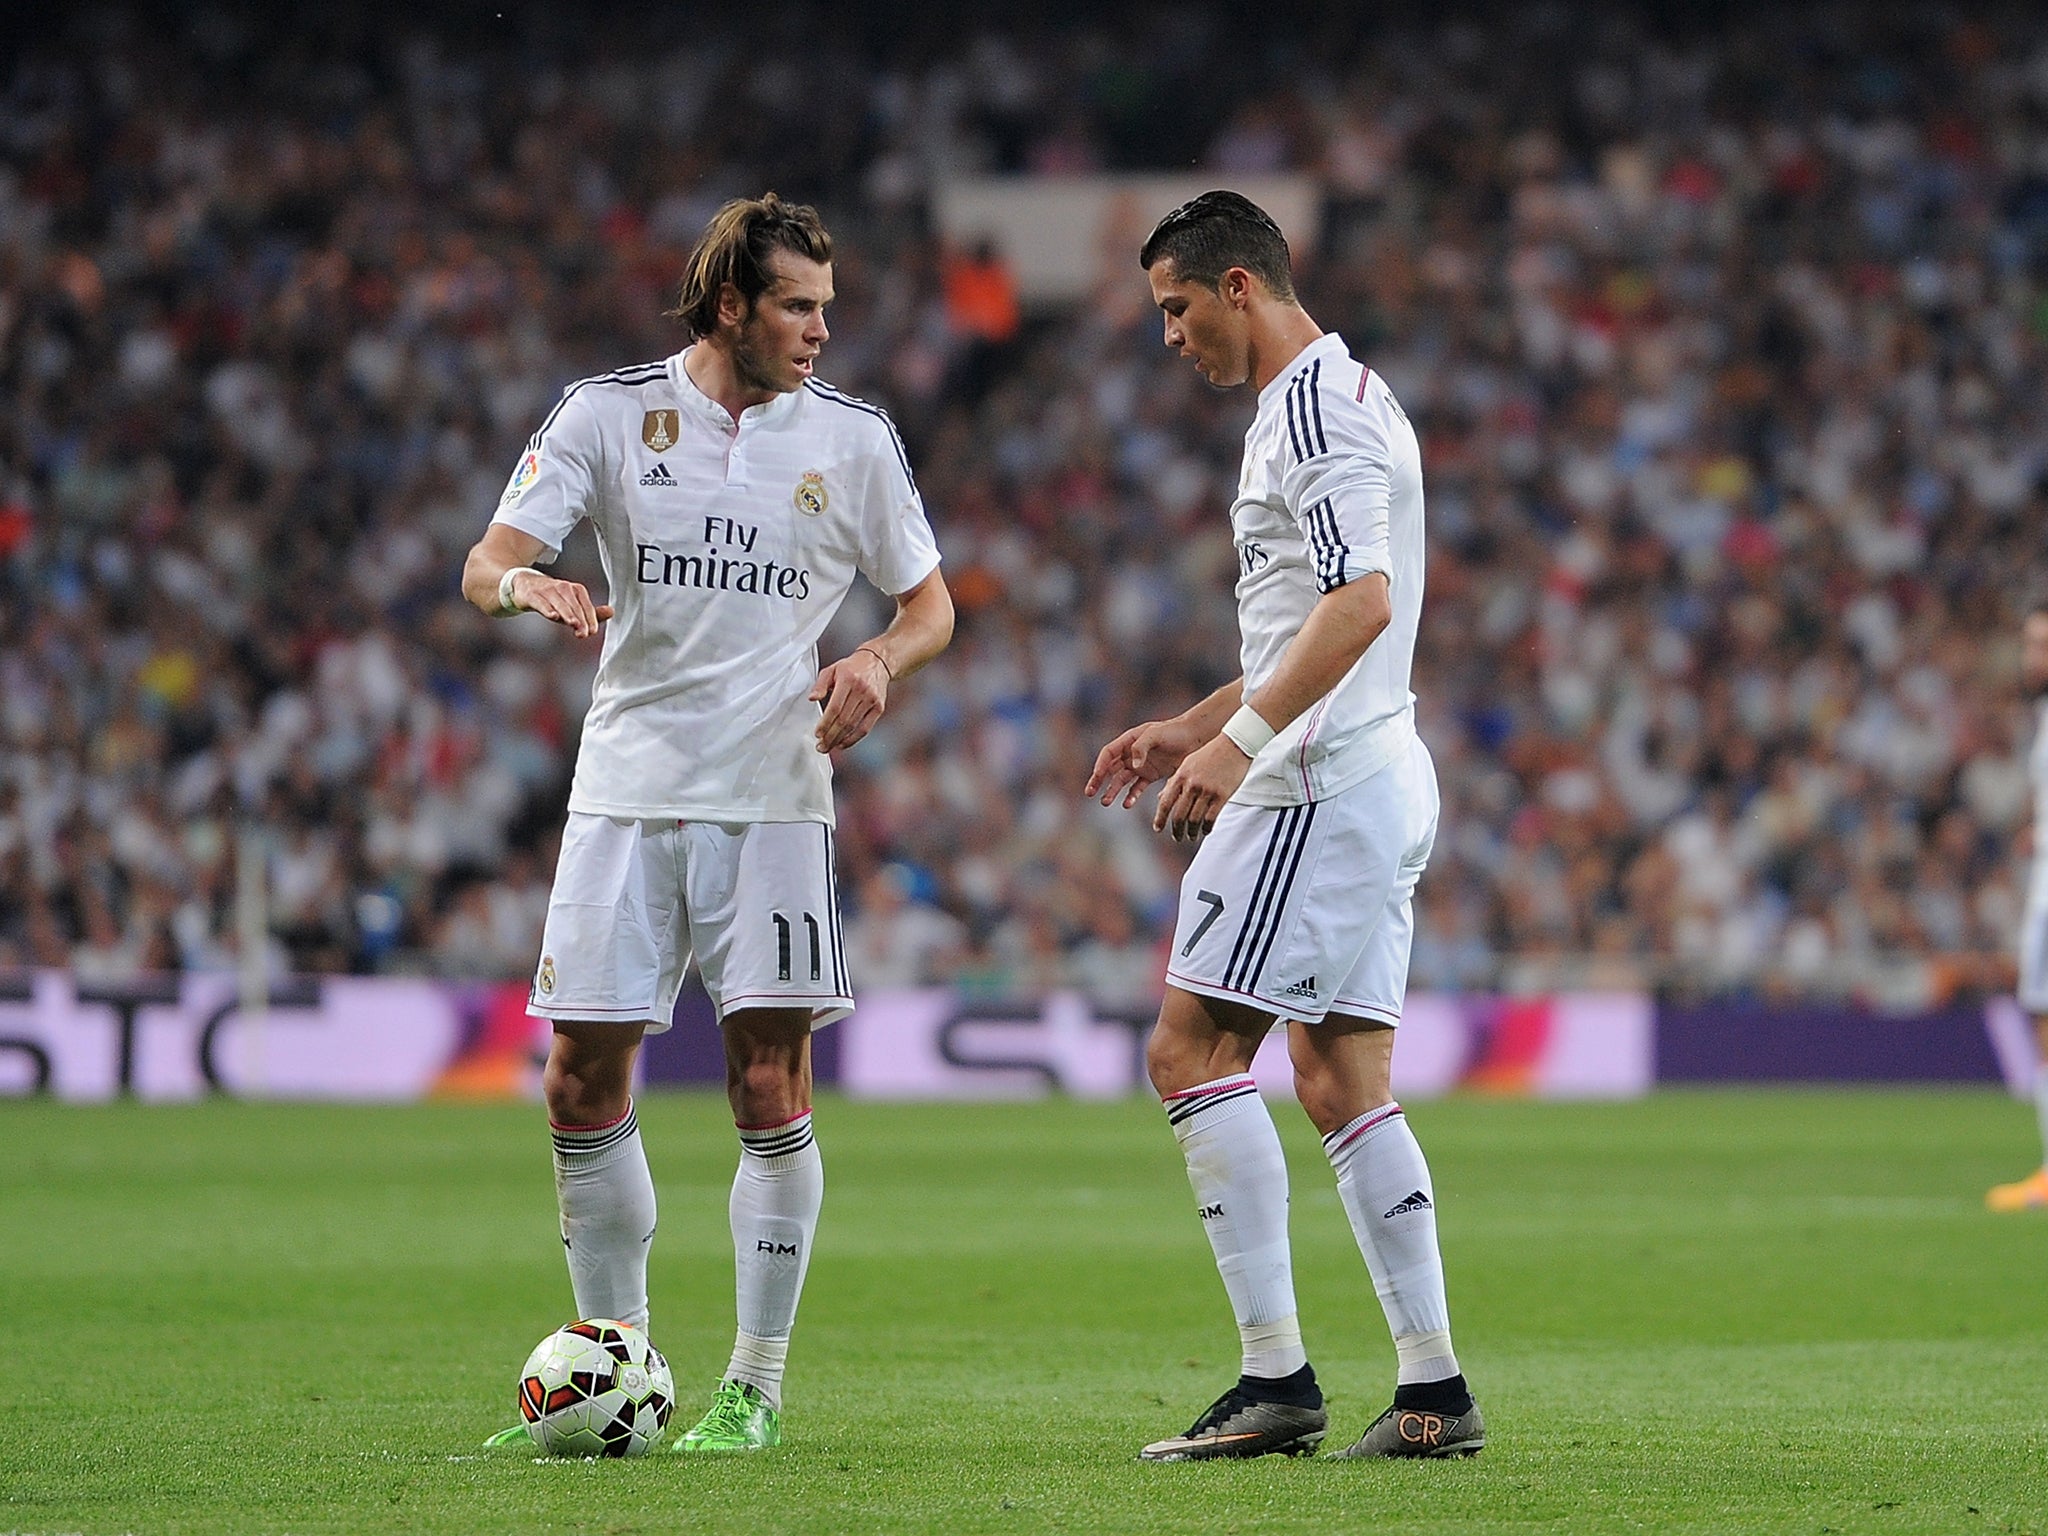 The two most expensive players in the world will both be on show in France over the next month